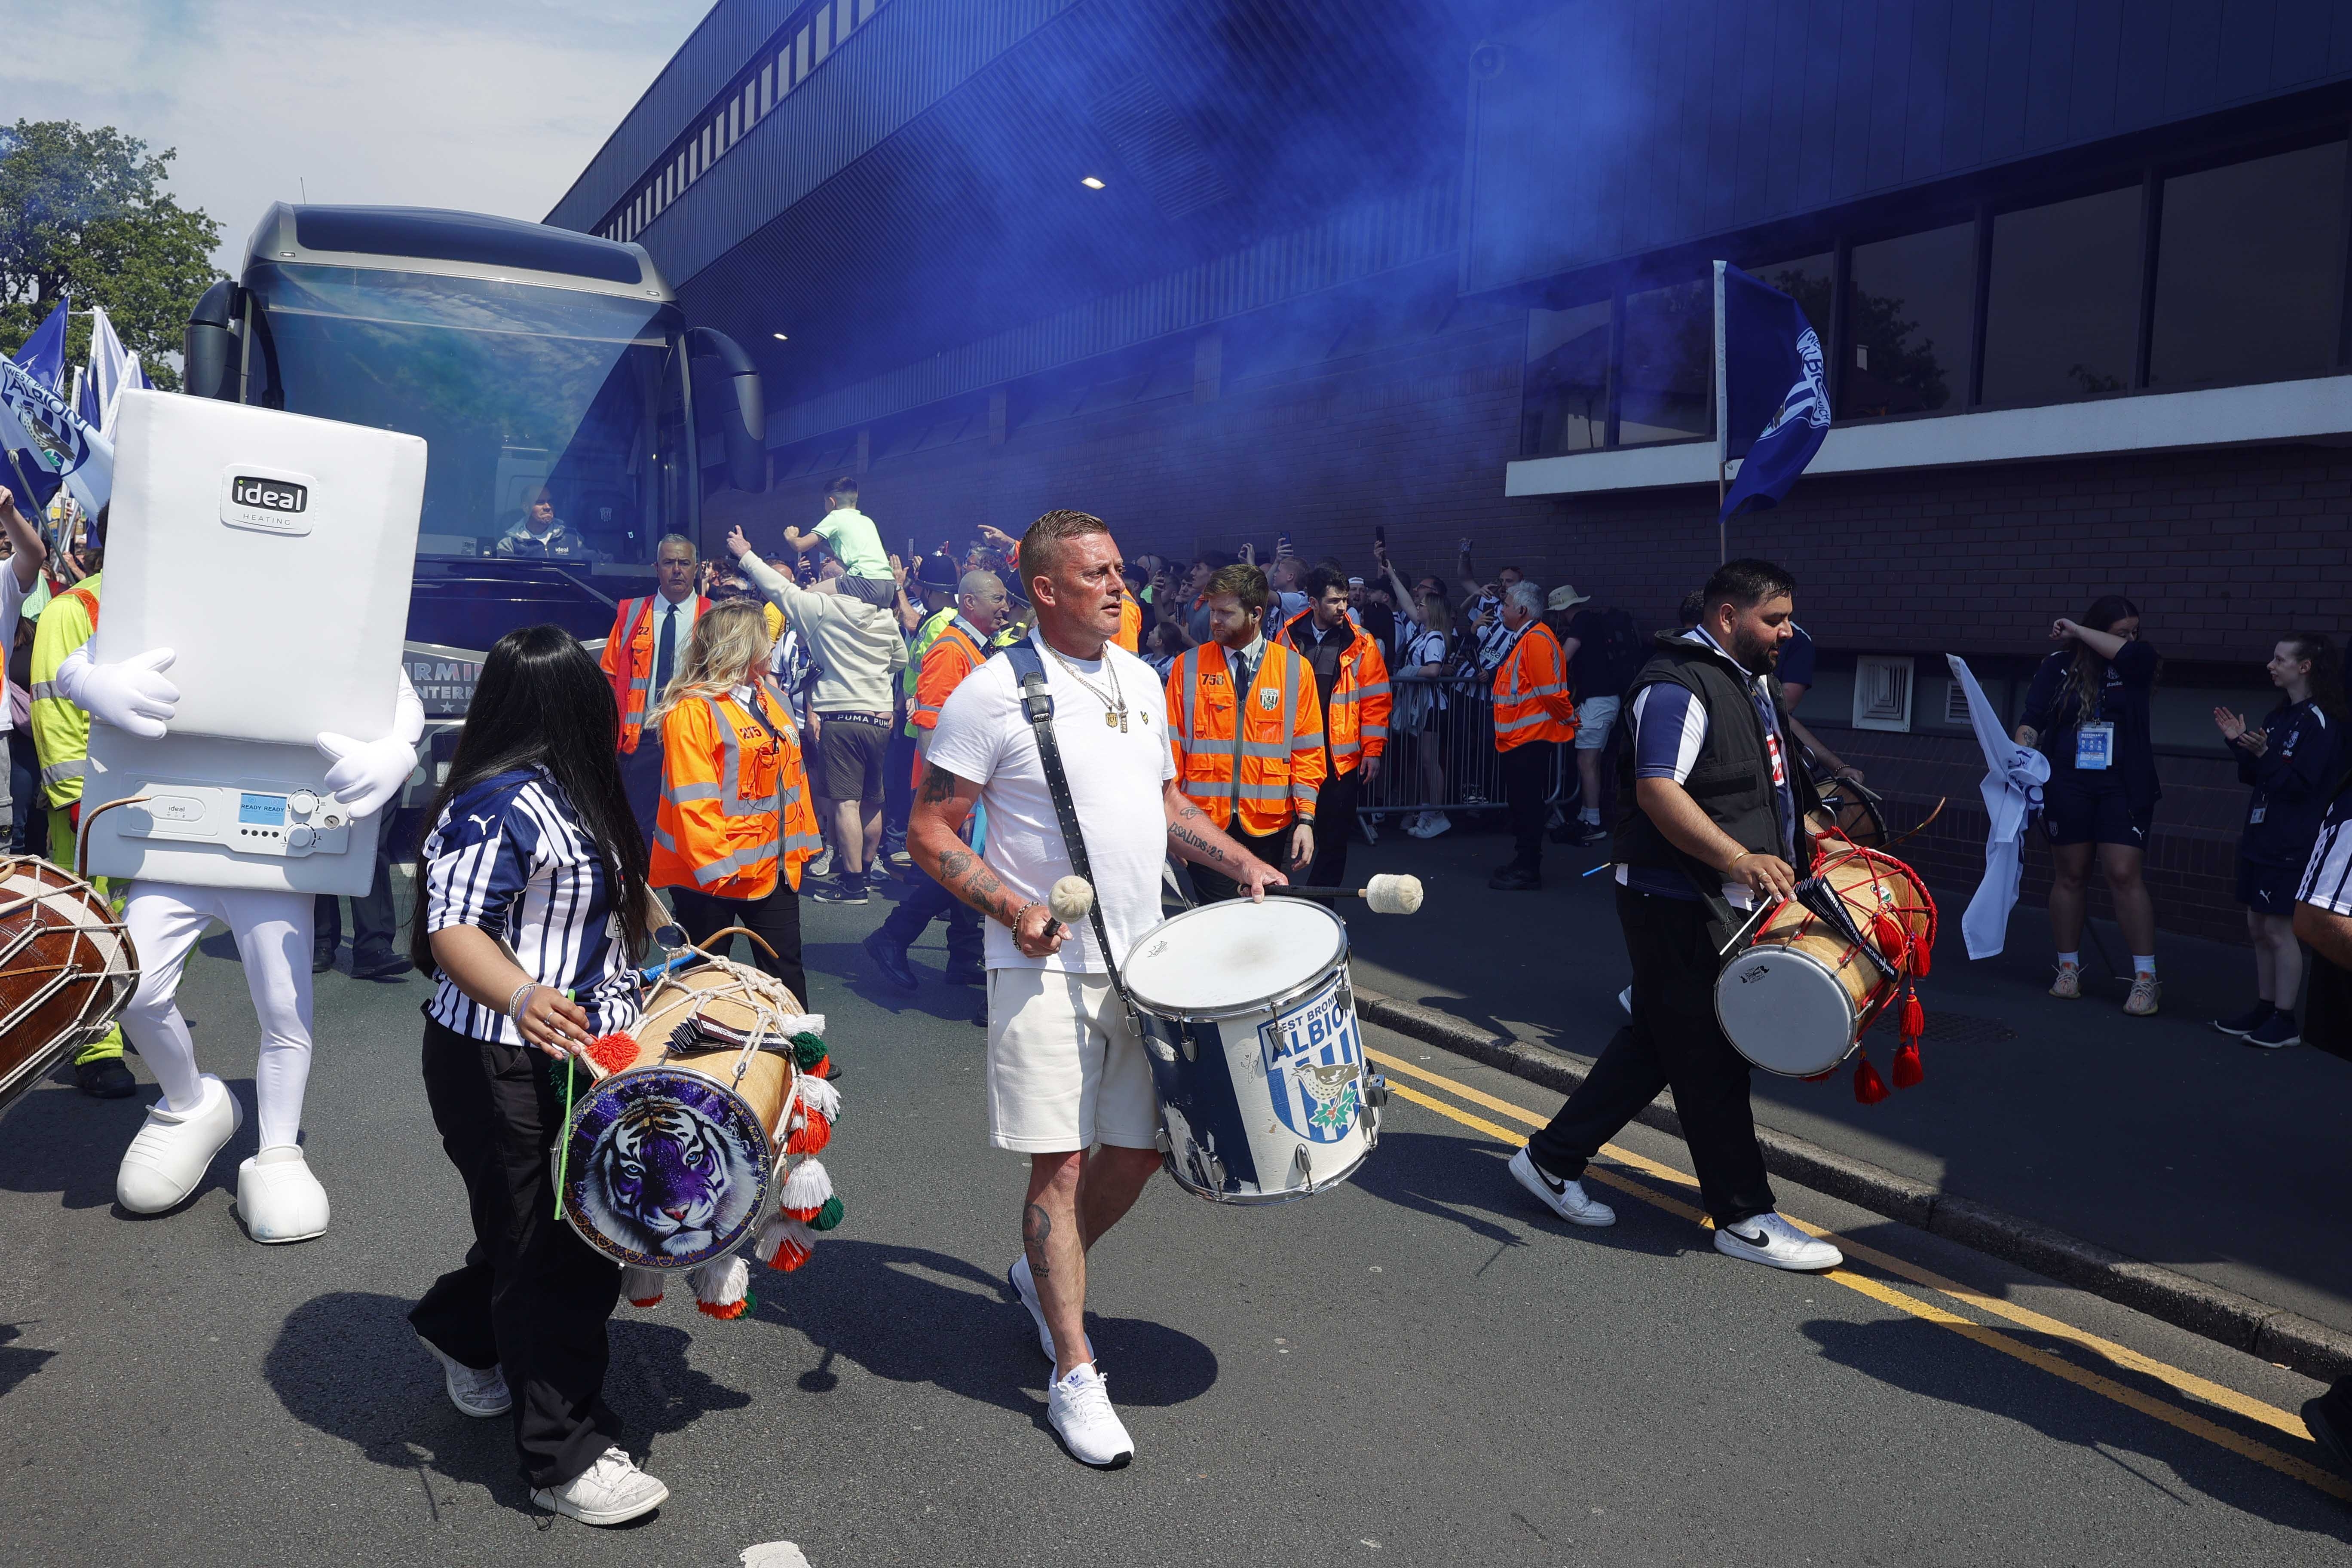 Drummers welcome the Albion team bus to The Hawthorns on Halfords Lane 